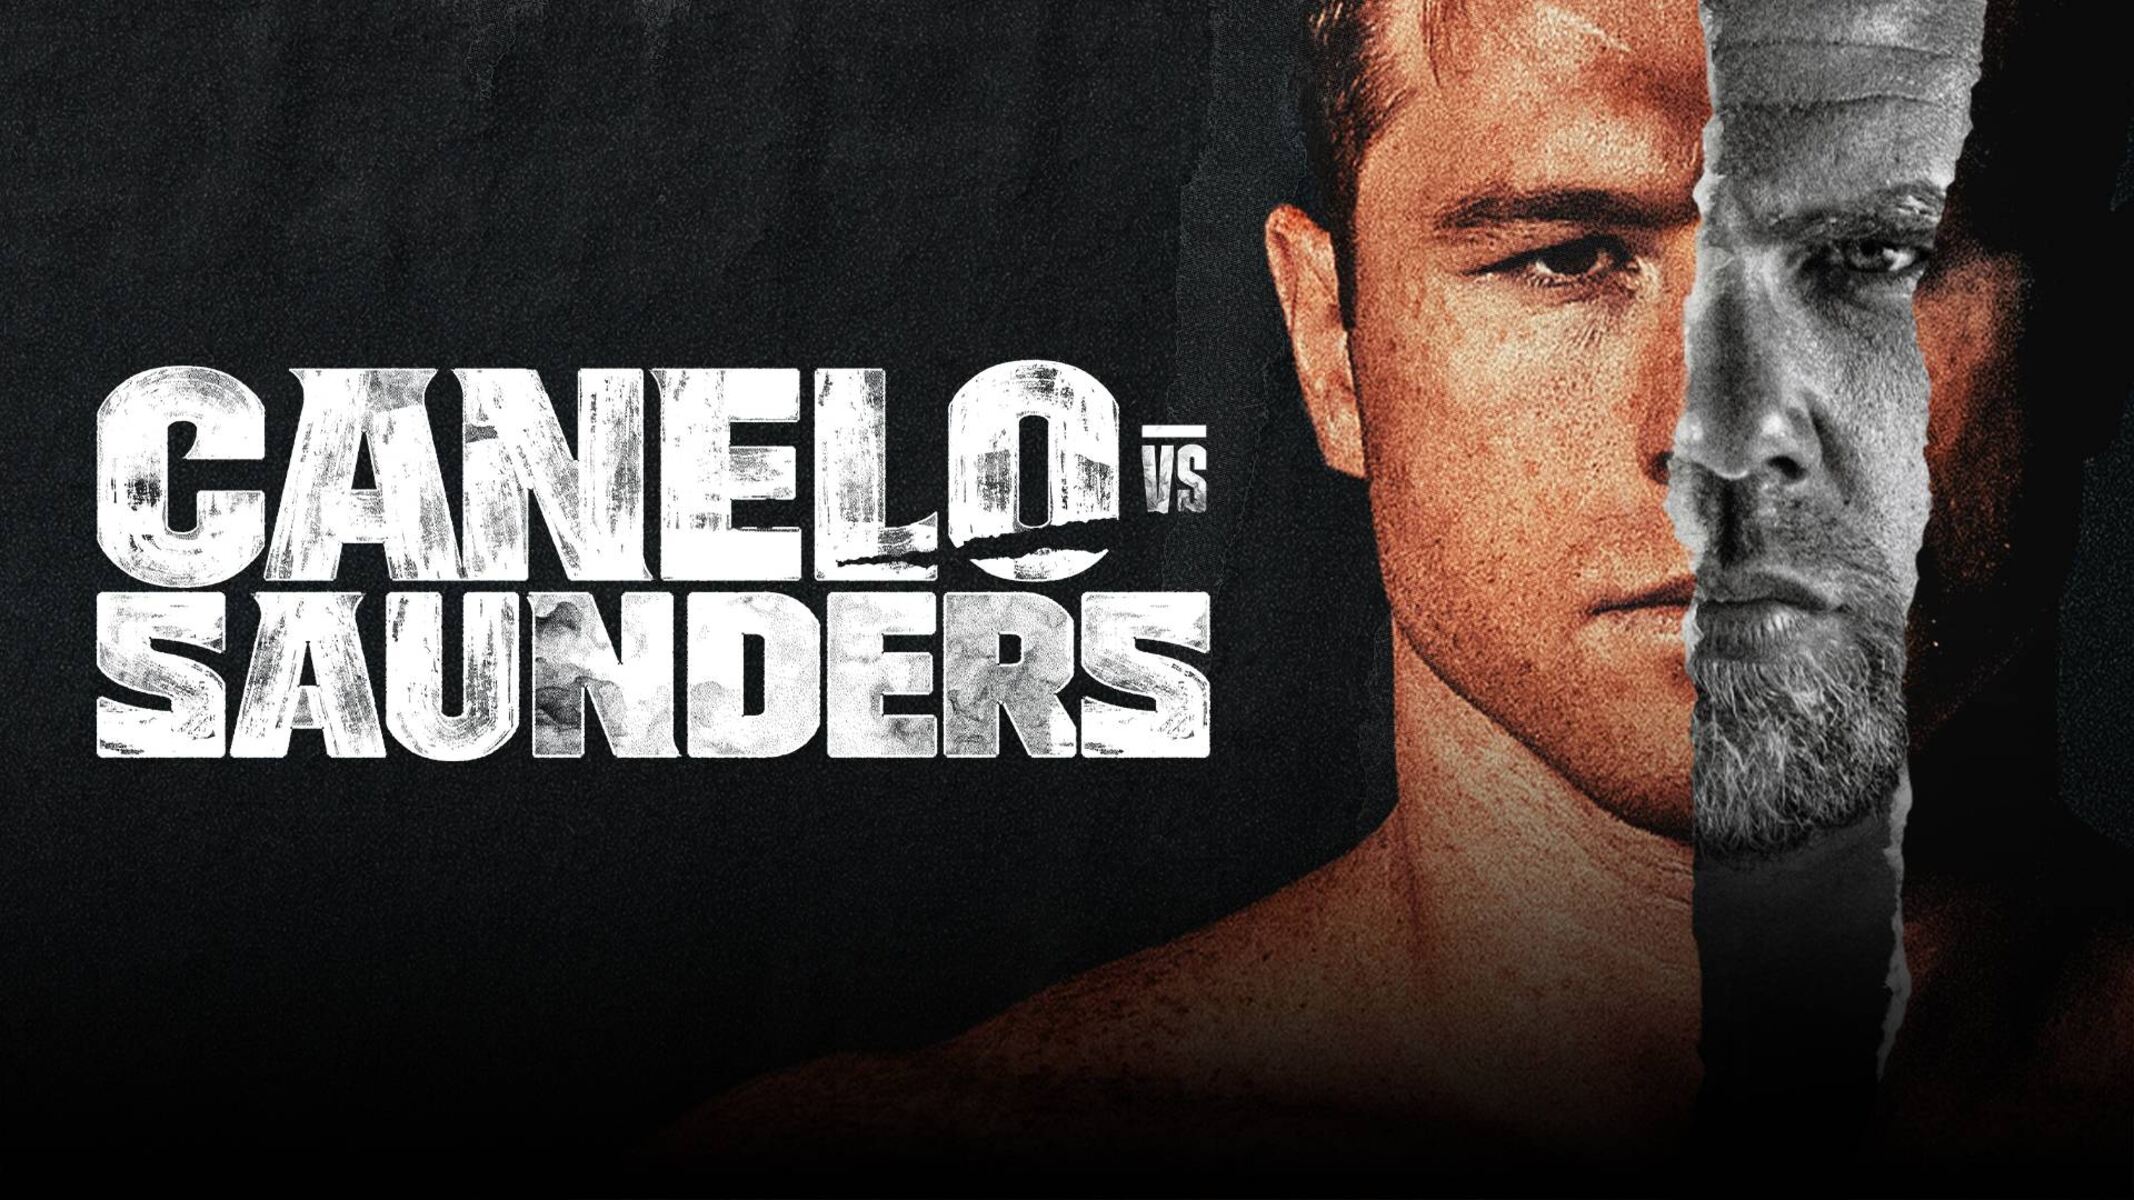 How To Watch Canelo Vs Saunders